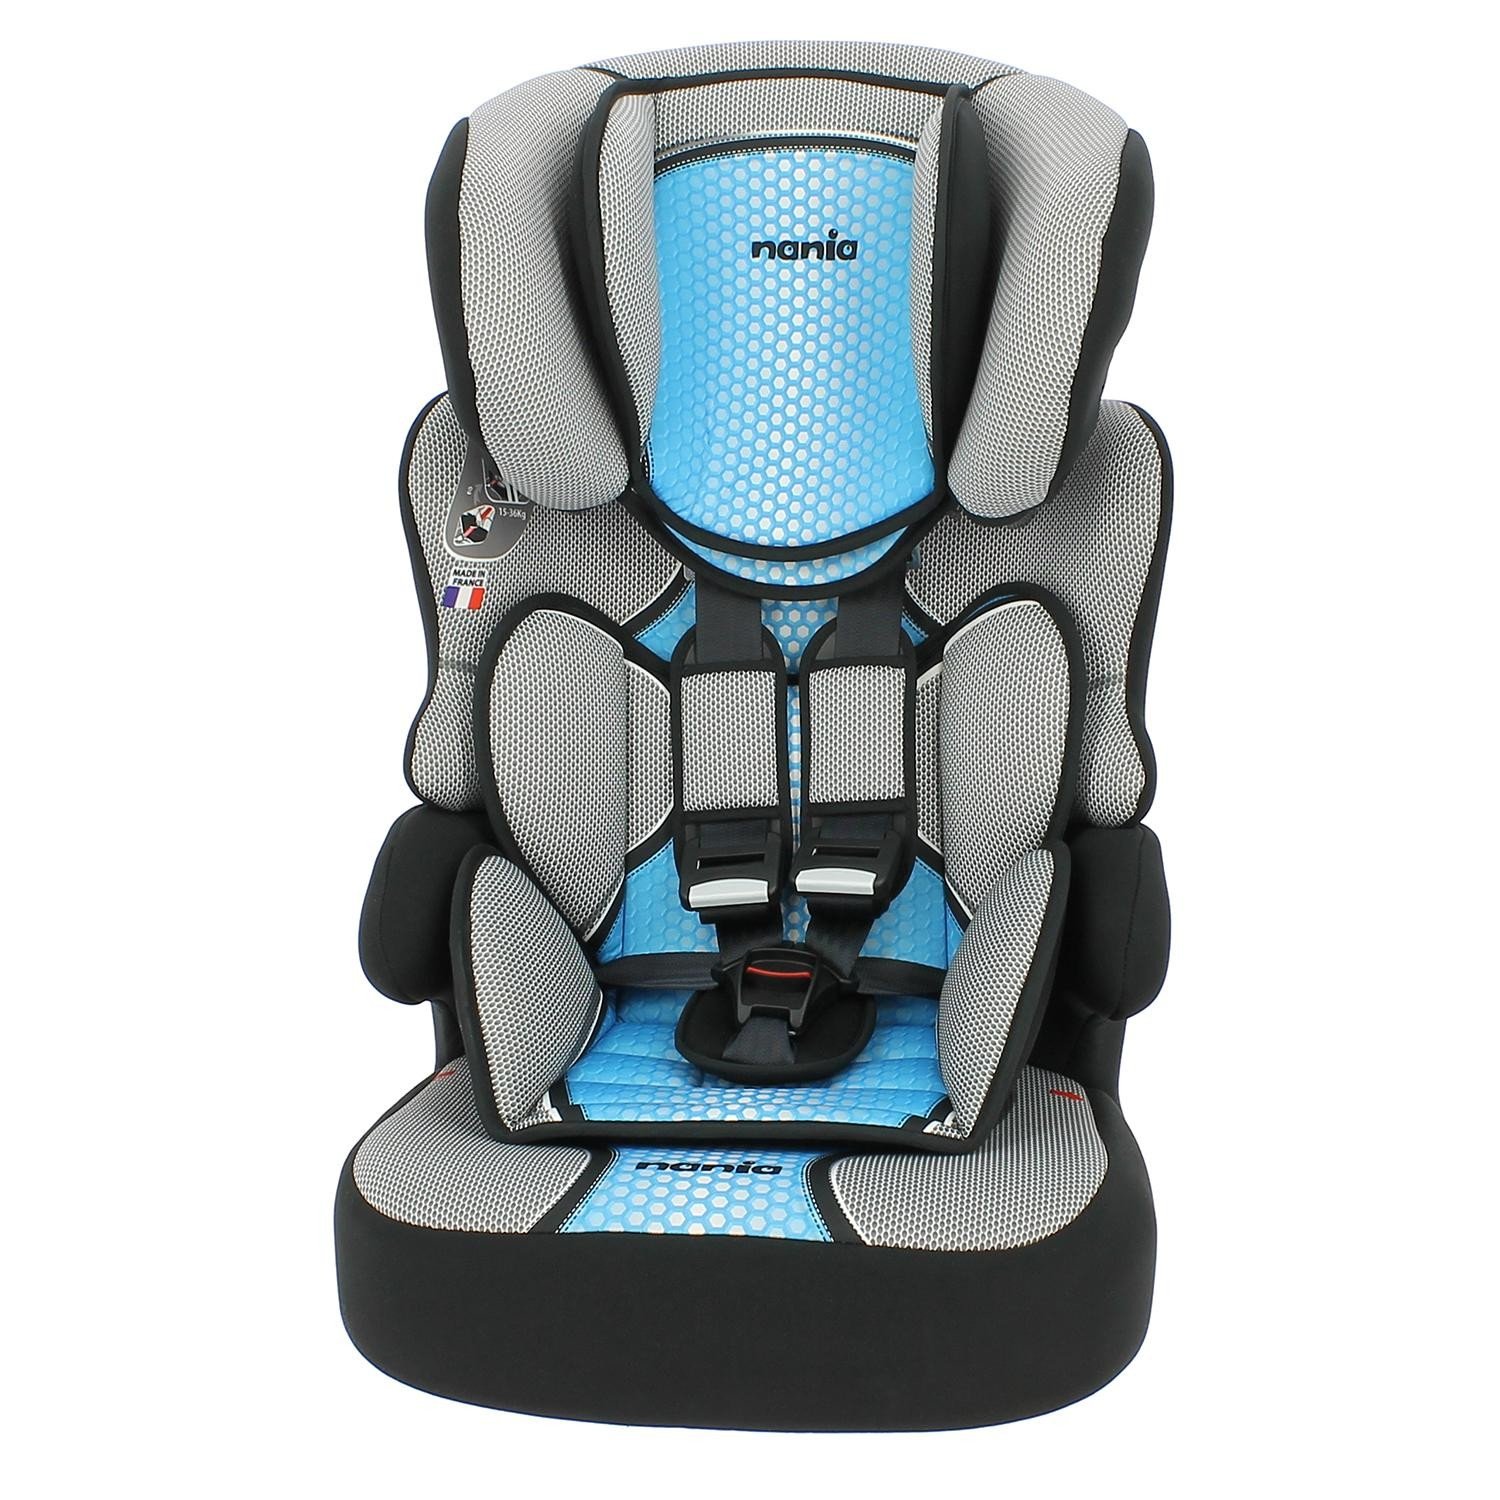 Mycarsit Car seat and booster seat